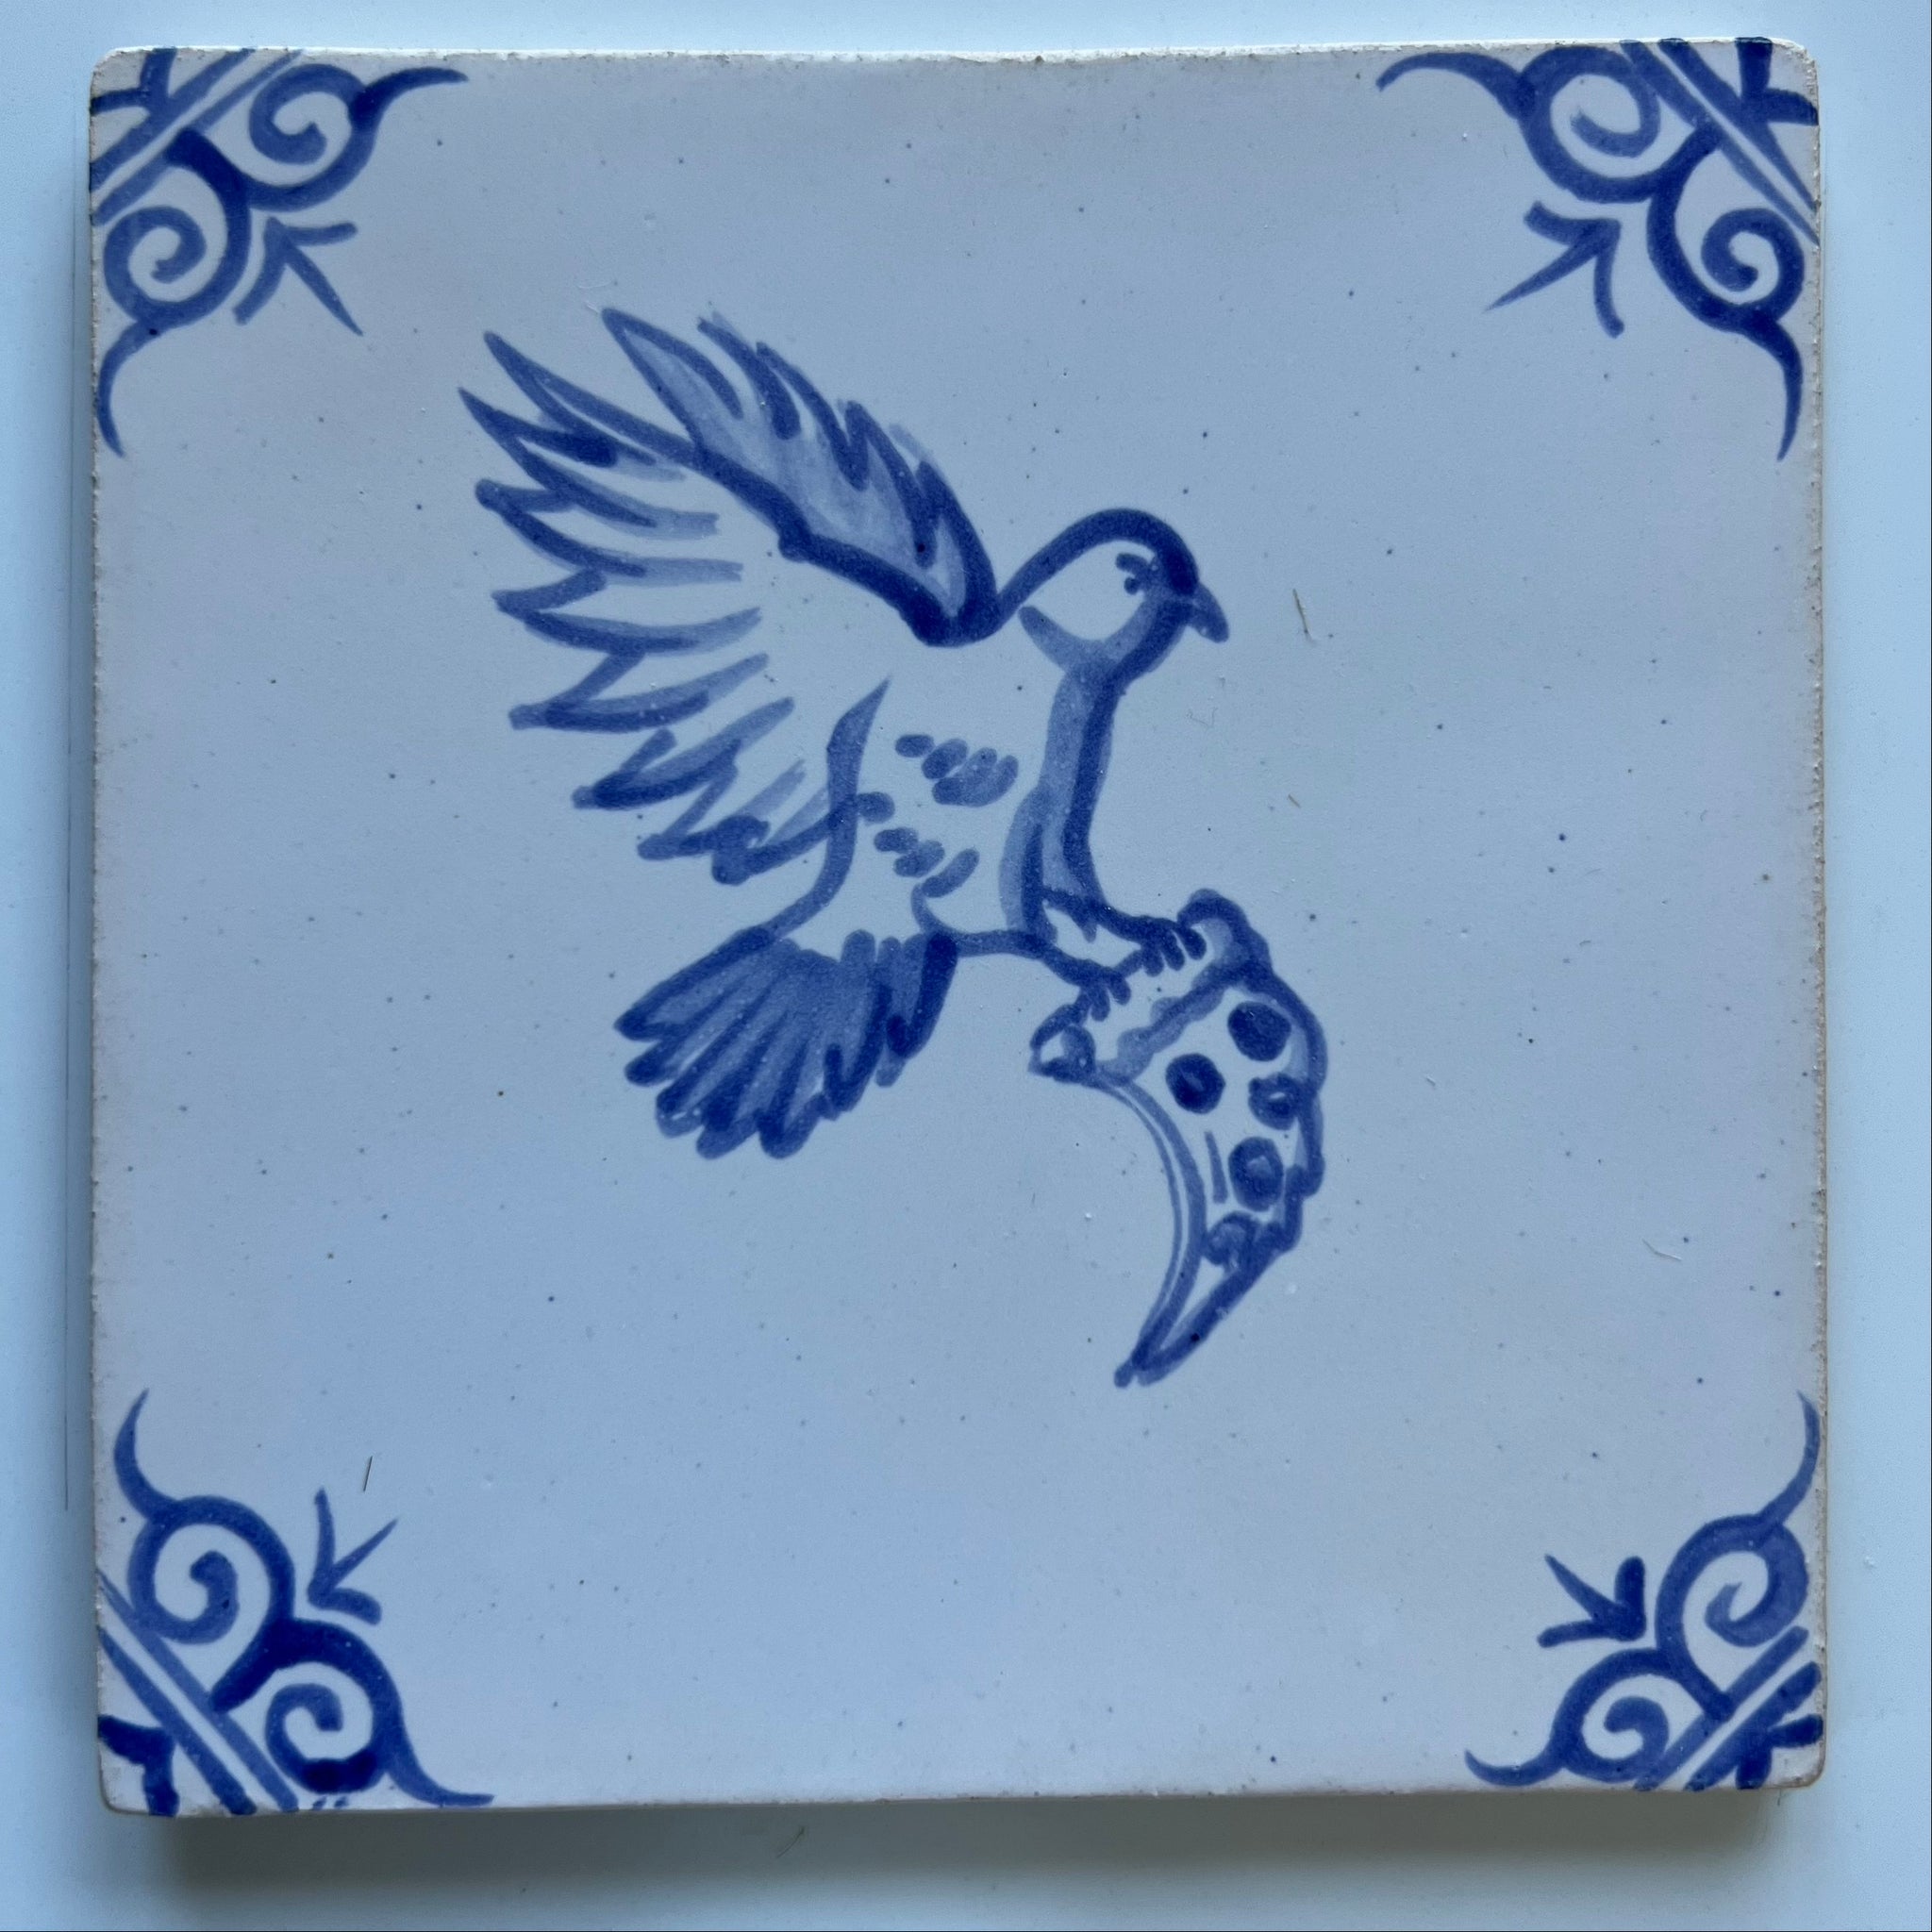 KV Tiles, "Pigeon with Pizza" SOLD